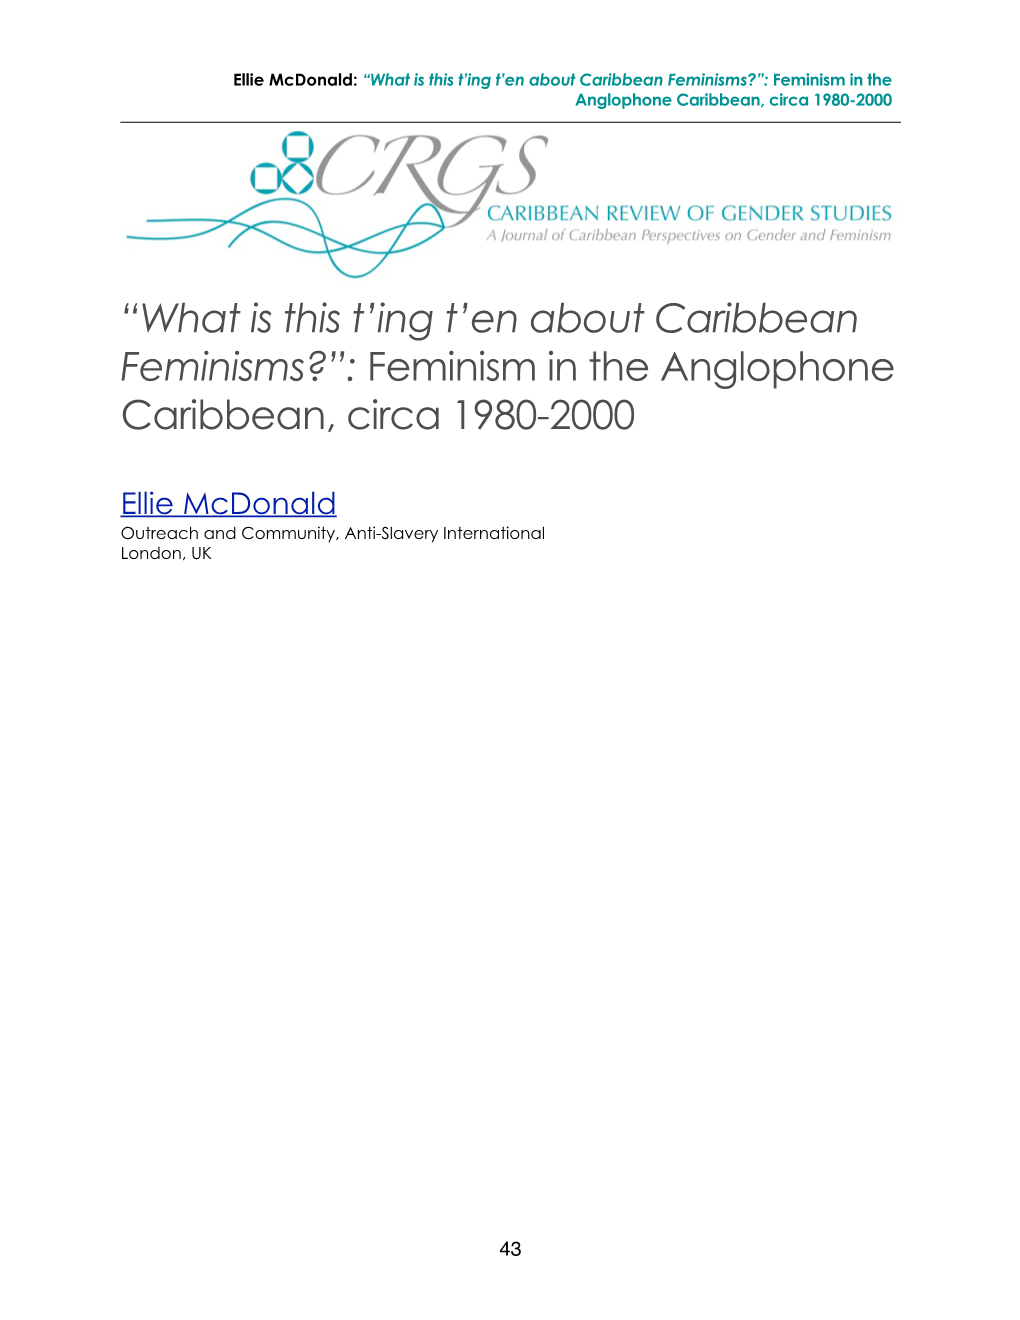 Feminism in the Anglophone Caribbean, Circa 1980-2000